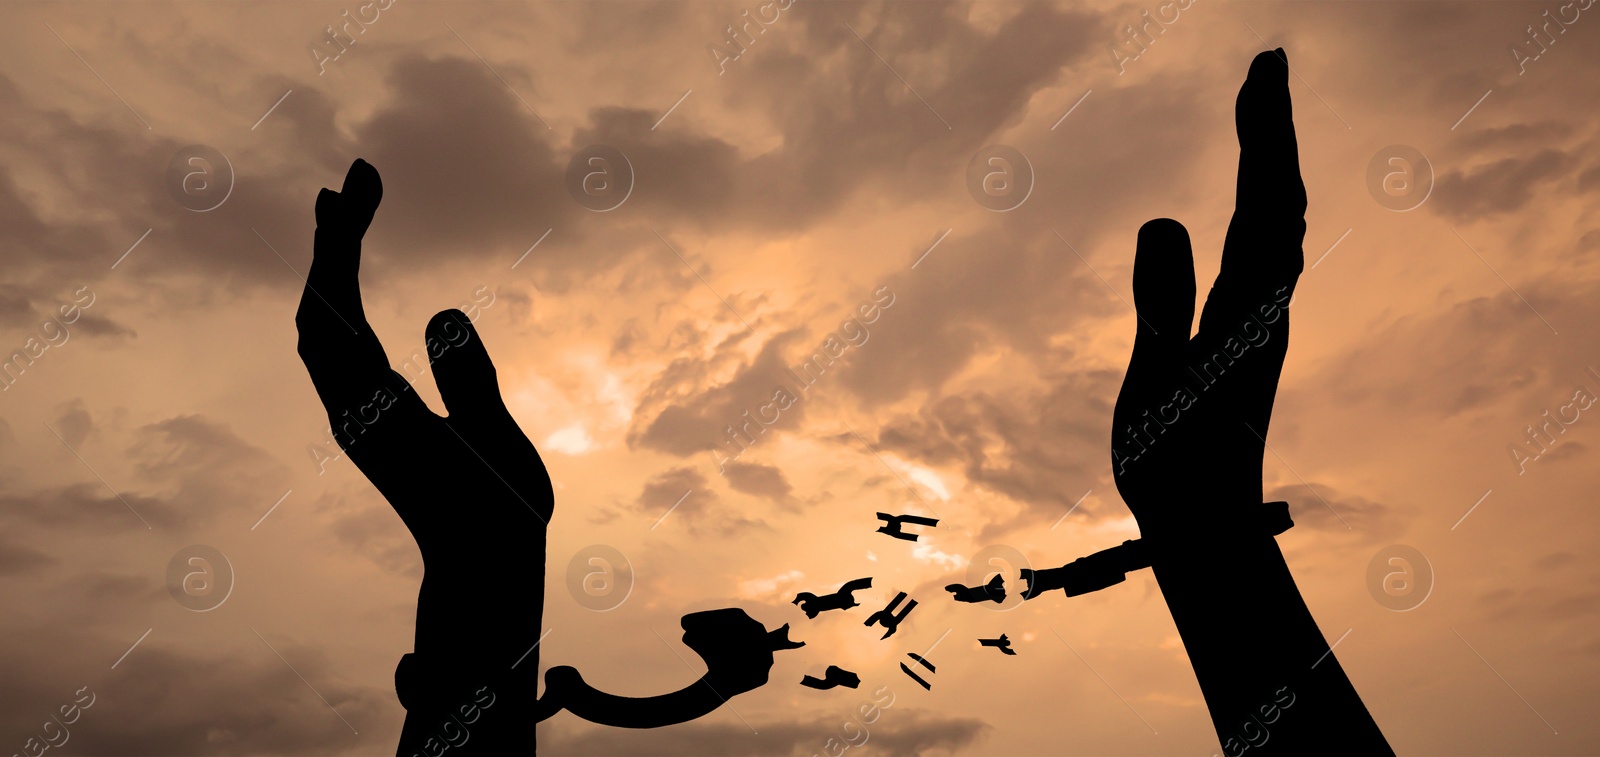 Image of Freedom. Woman with broken handcuffs against cloudy sky at sunset, closeup. Banner design